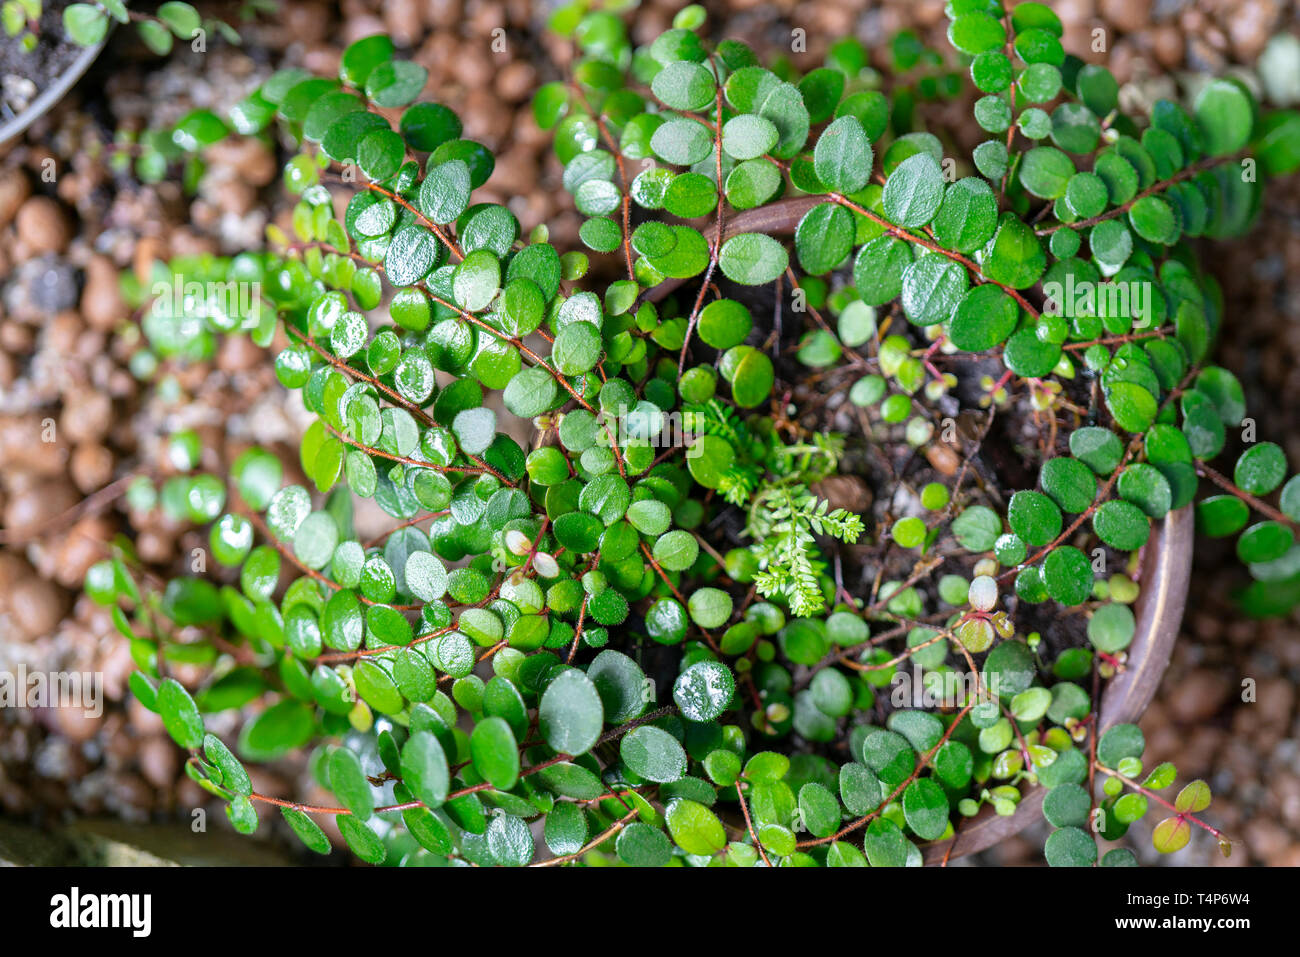 Ornamental small round in a pot. view Stock Photo - Alamy